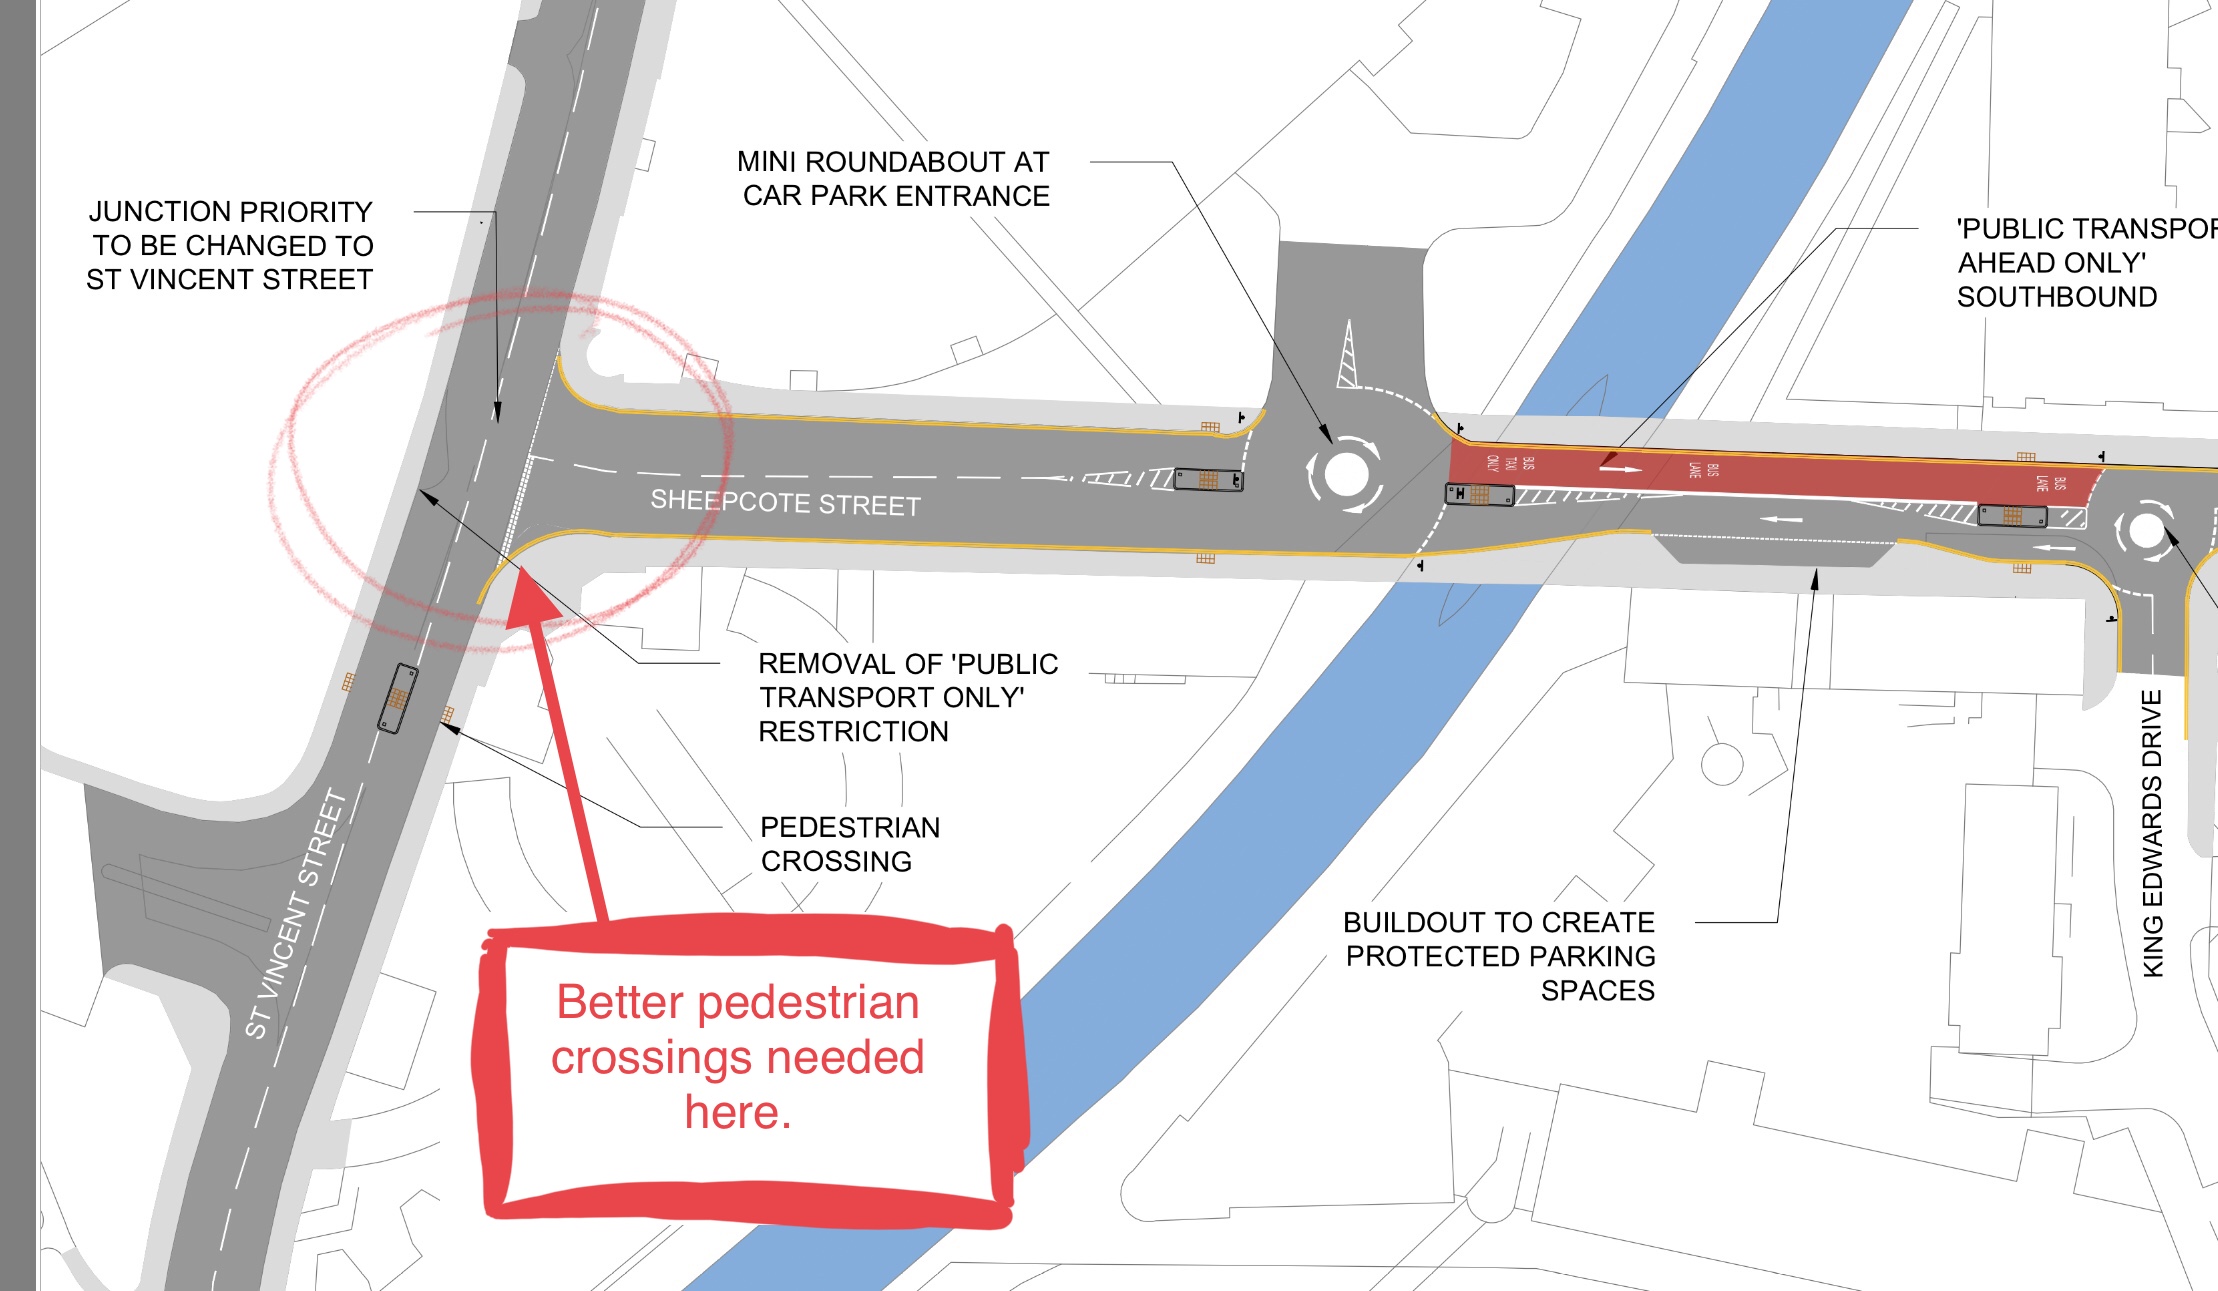 Proposed changes to St Vincent Street / Sheepcote Street junction